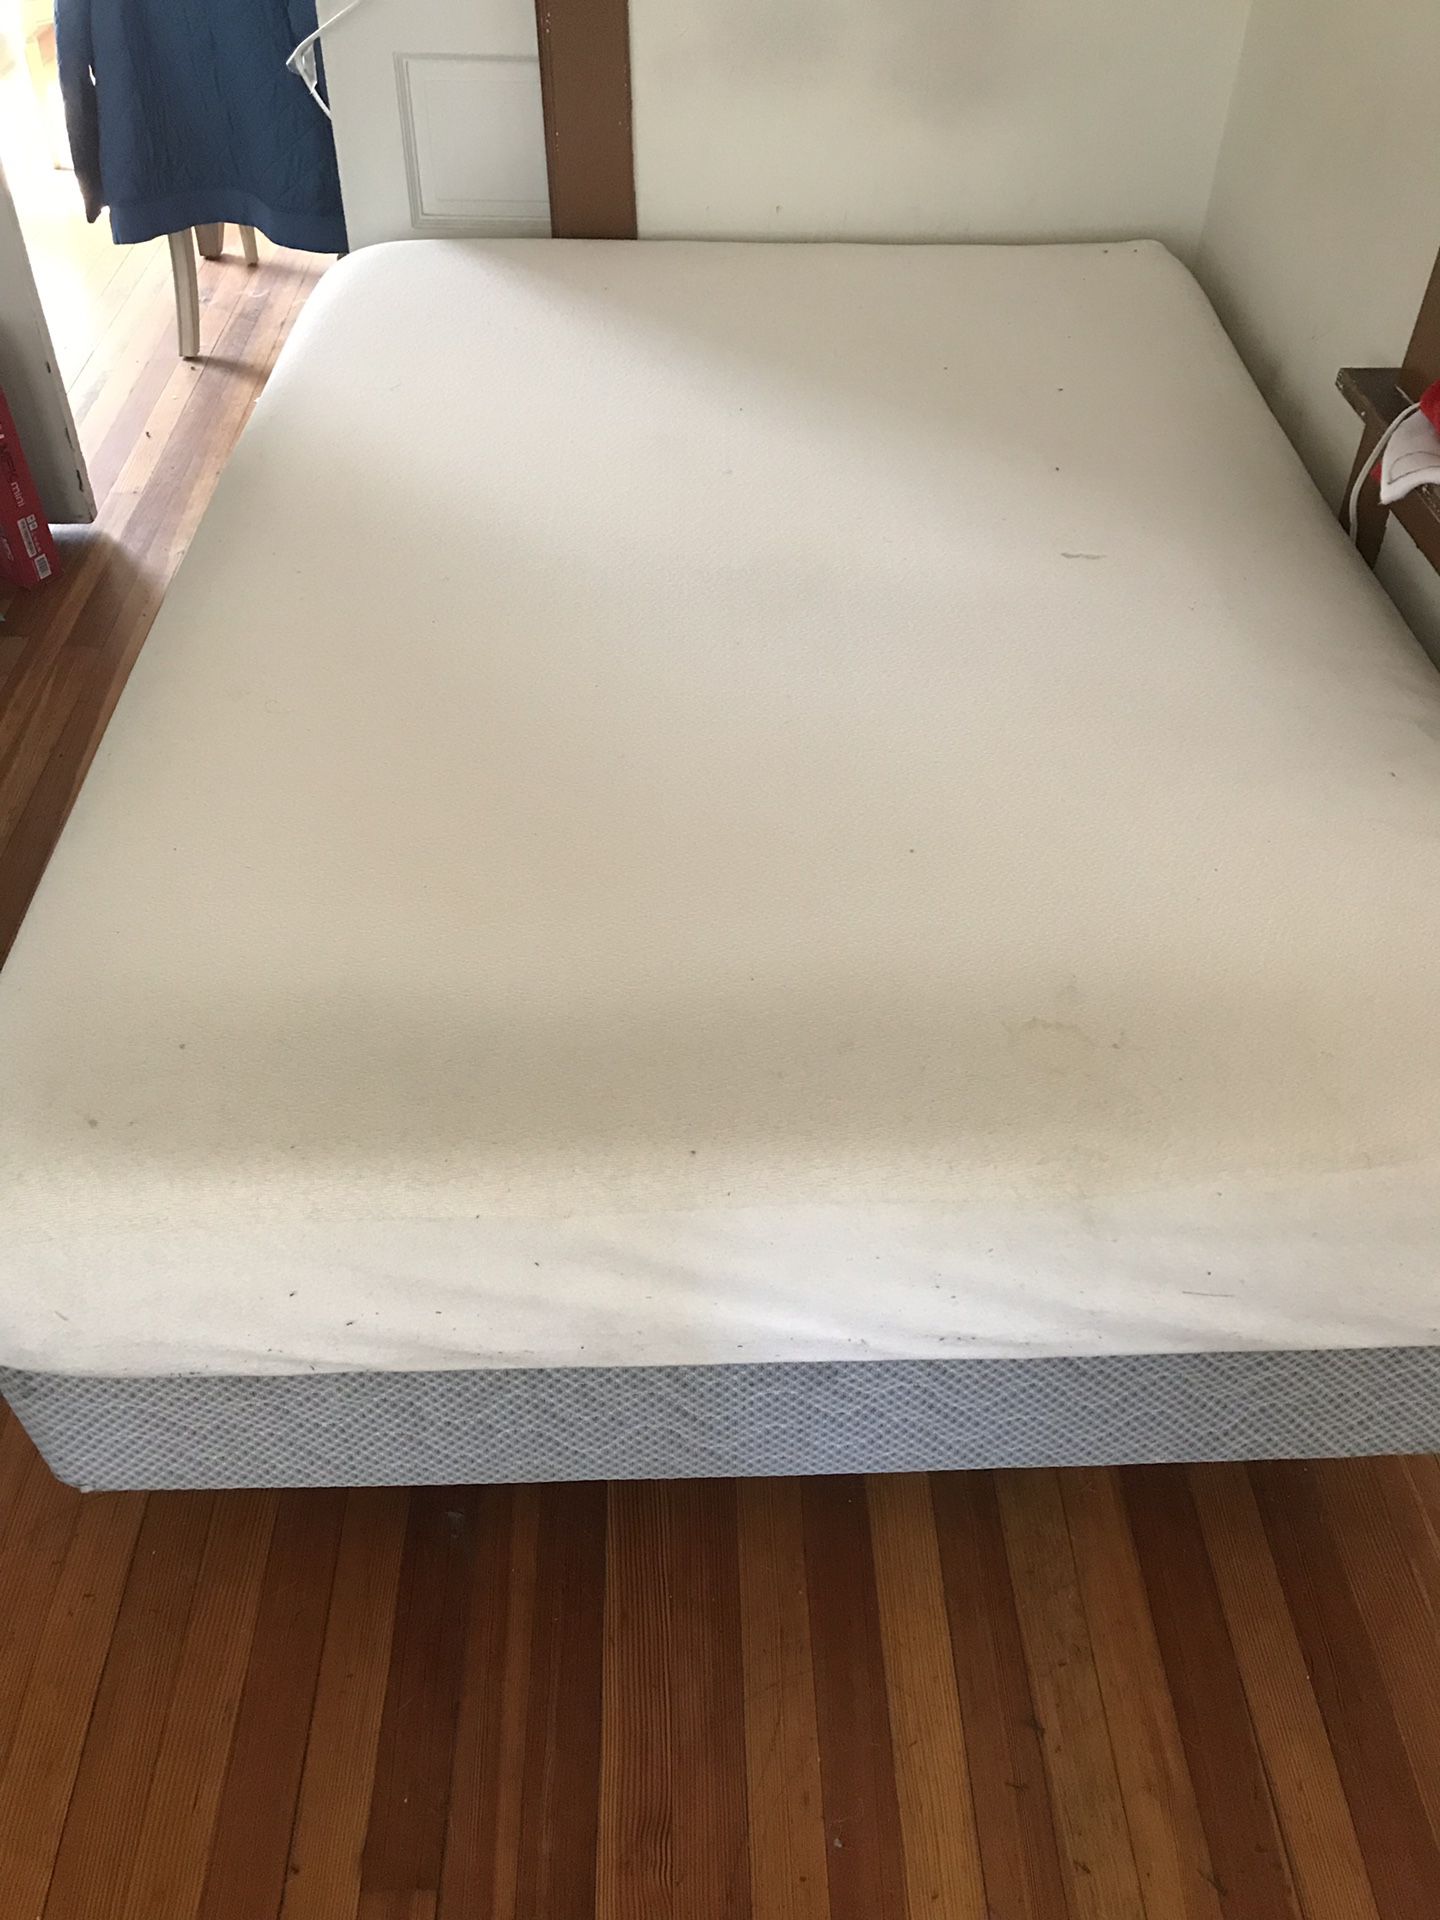 Full Size Bed Set(Bed Frame, Box Spring, and Memory Foam mattress)